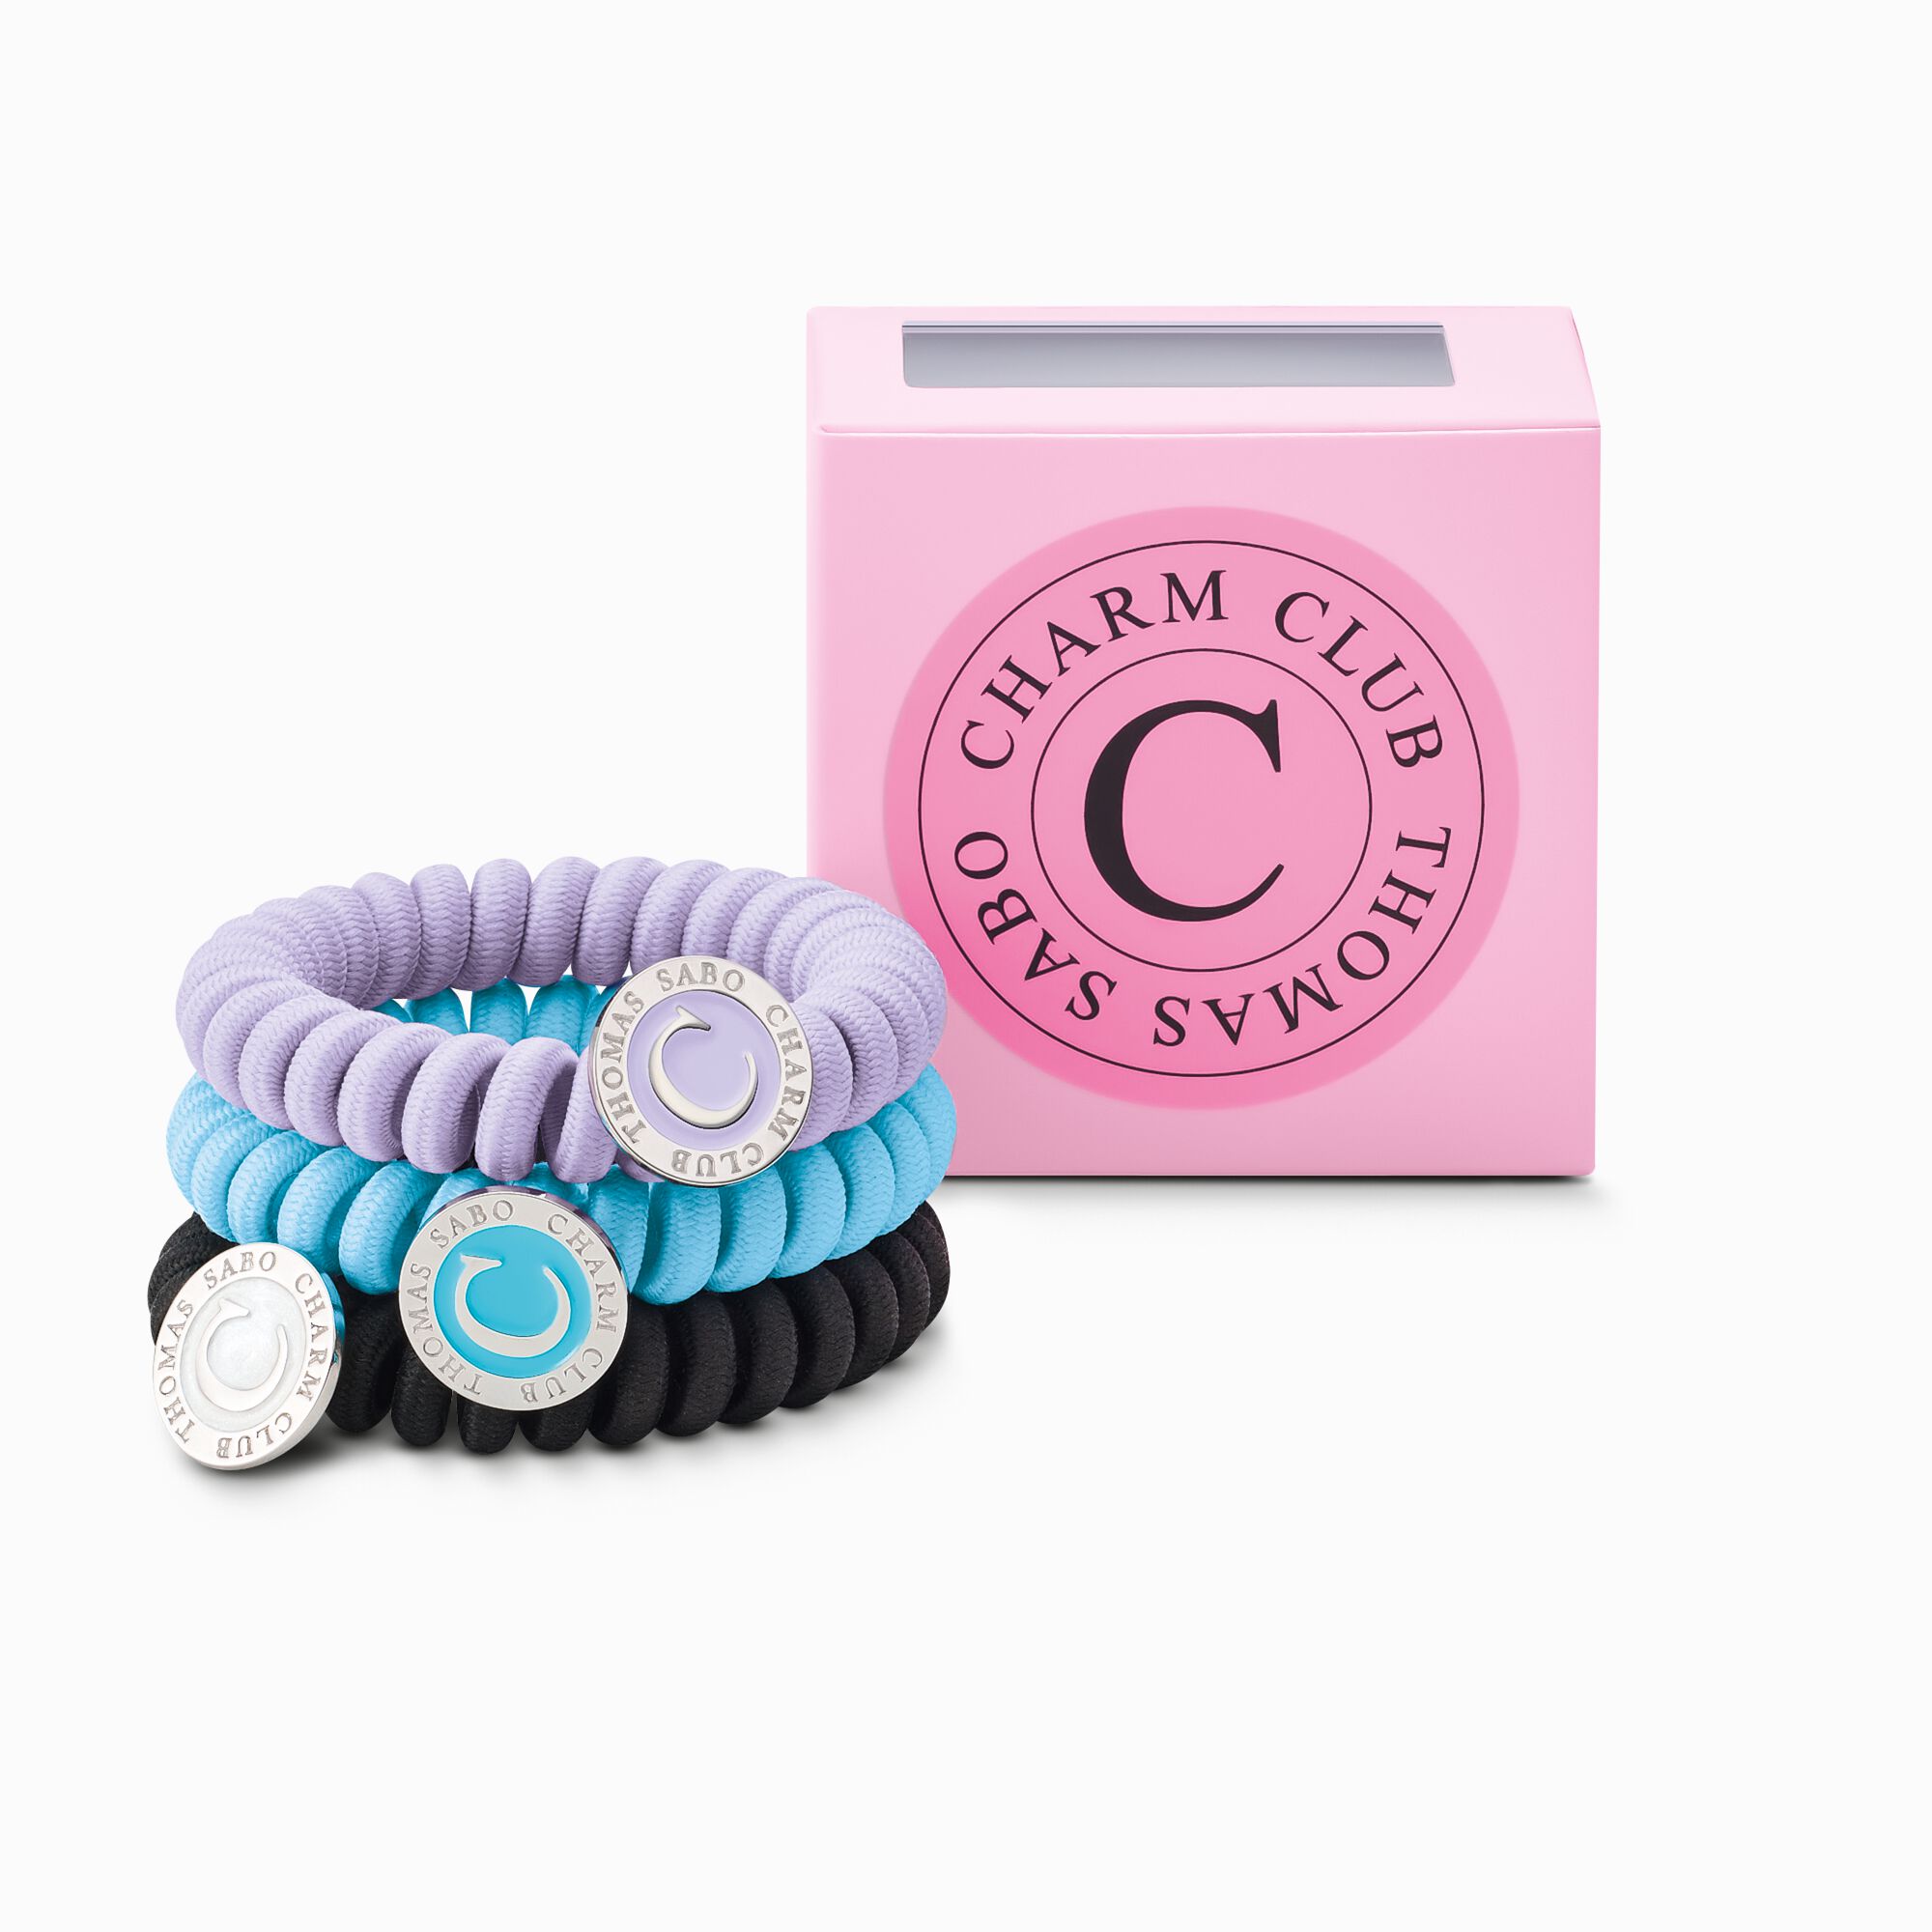 Charm Club Hair Ties Set from the Charm Club collection in the THOMAS SABO online store